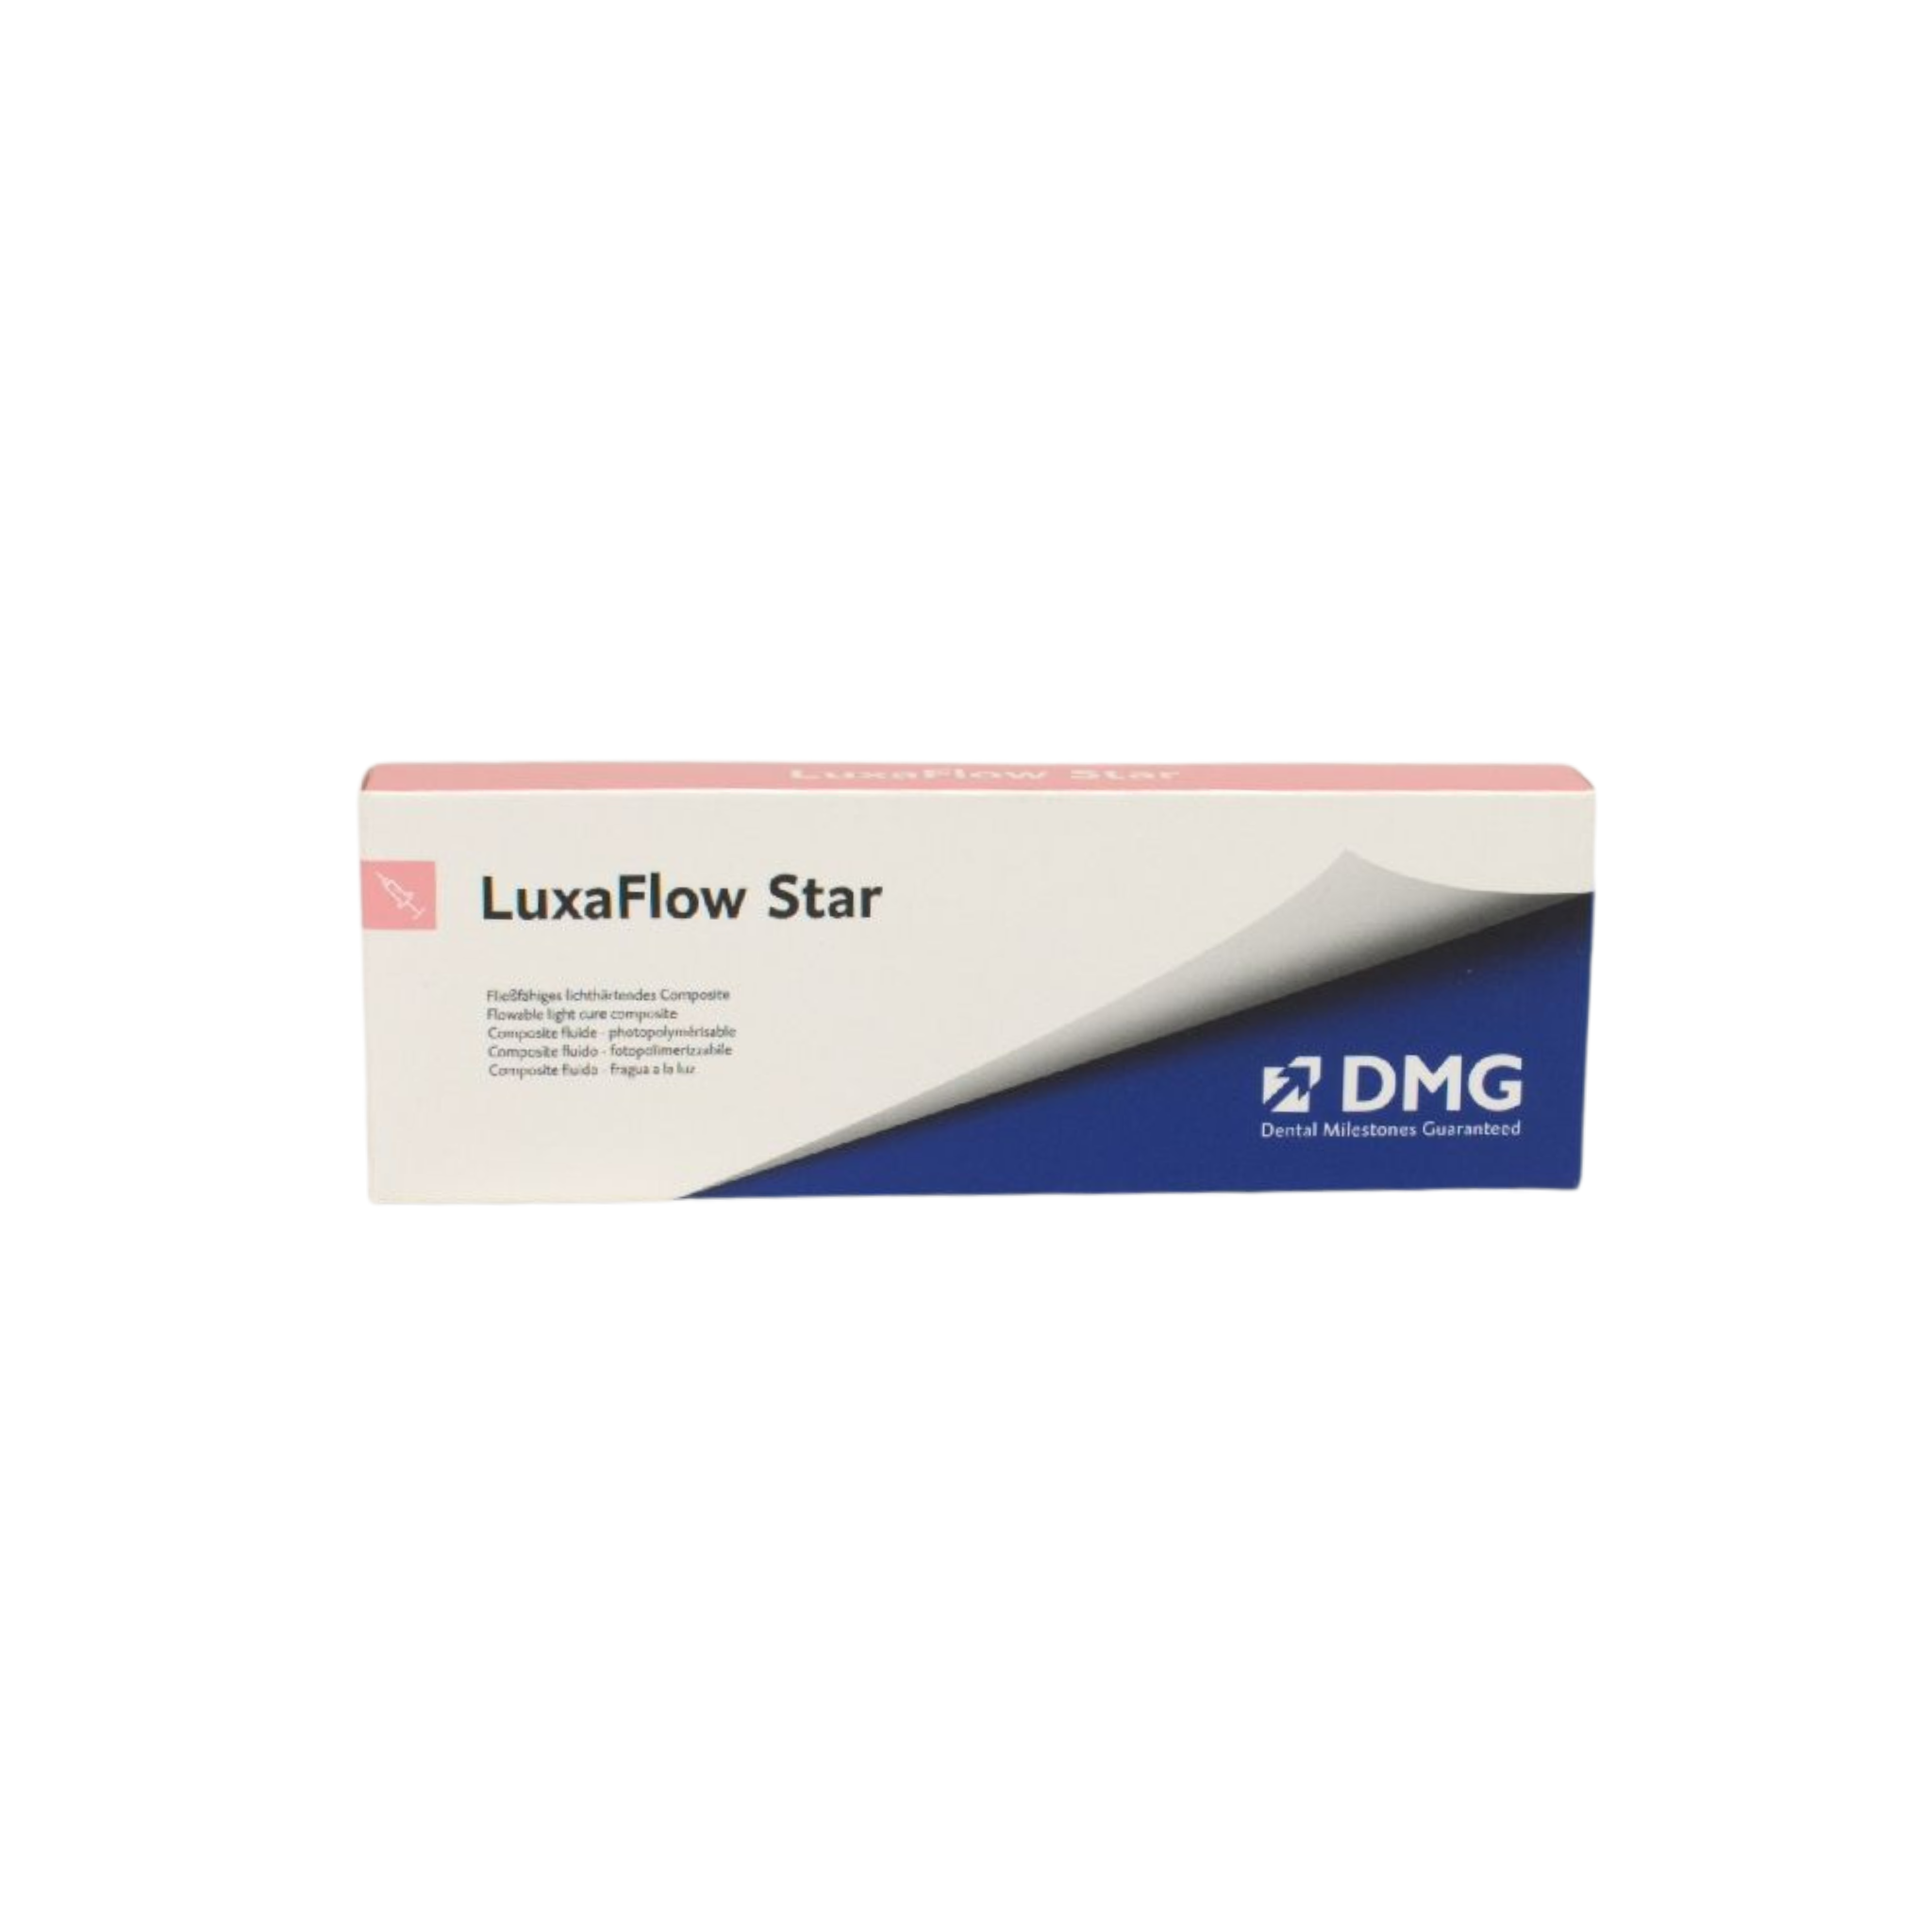 LuxaFlow Star <br> A2 <br>Packung 2 x 1,5 g